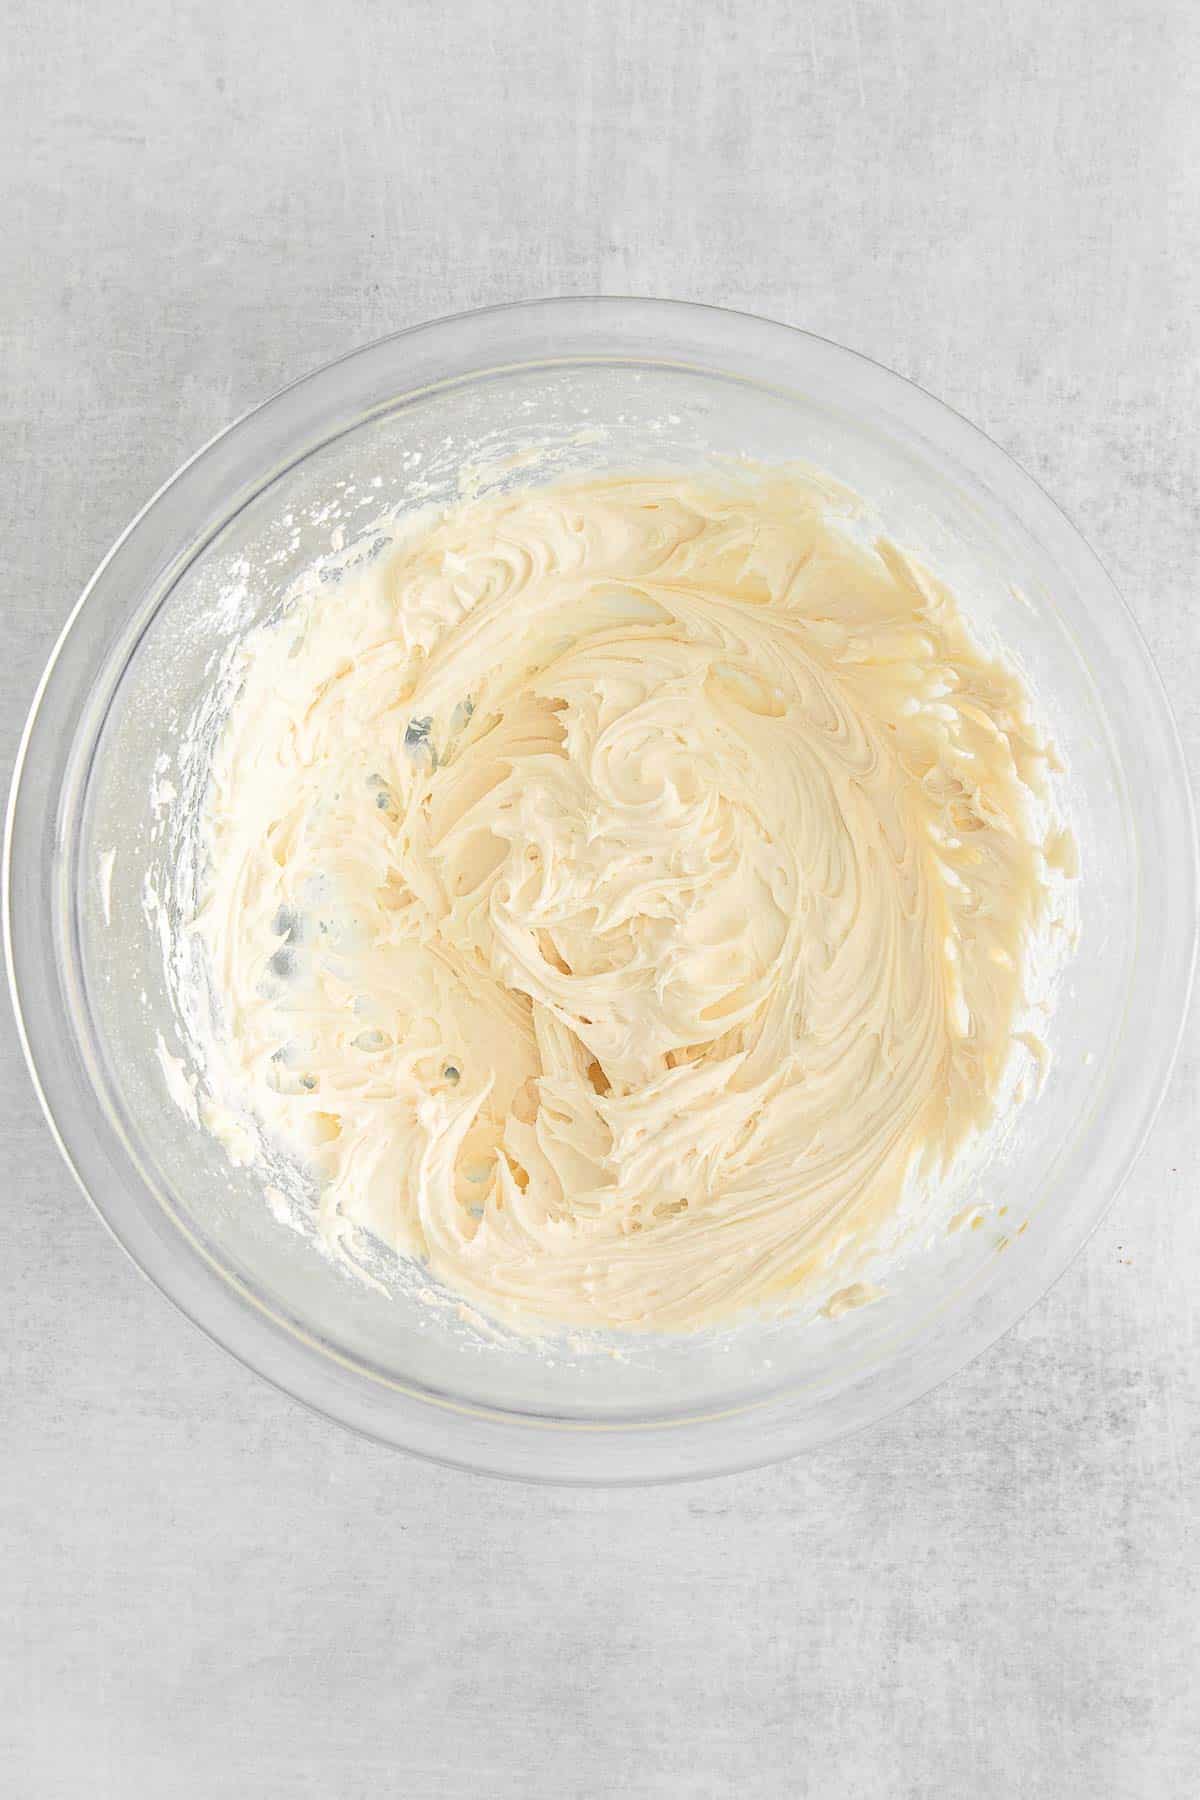 Frosting mixture in a glass bowl.